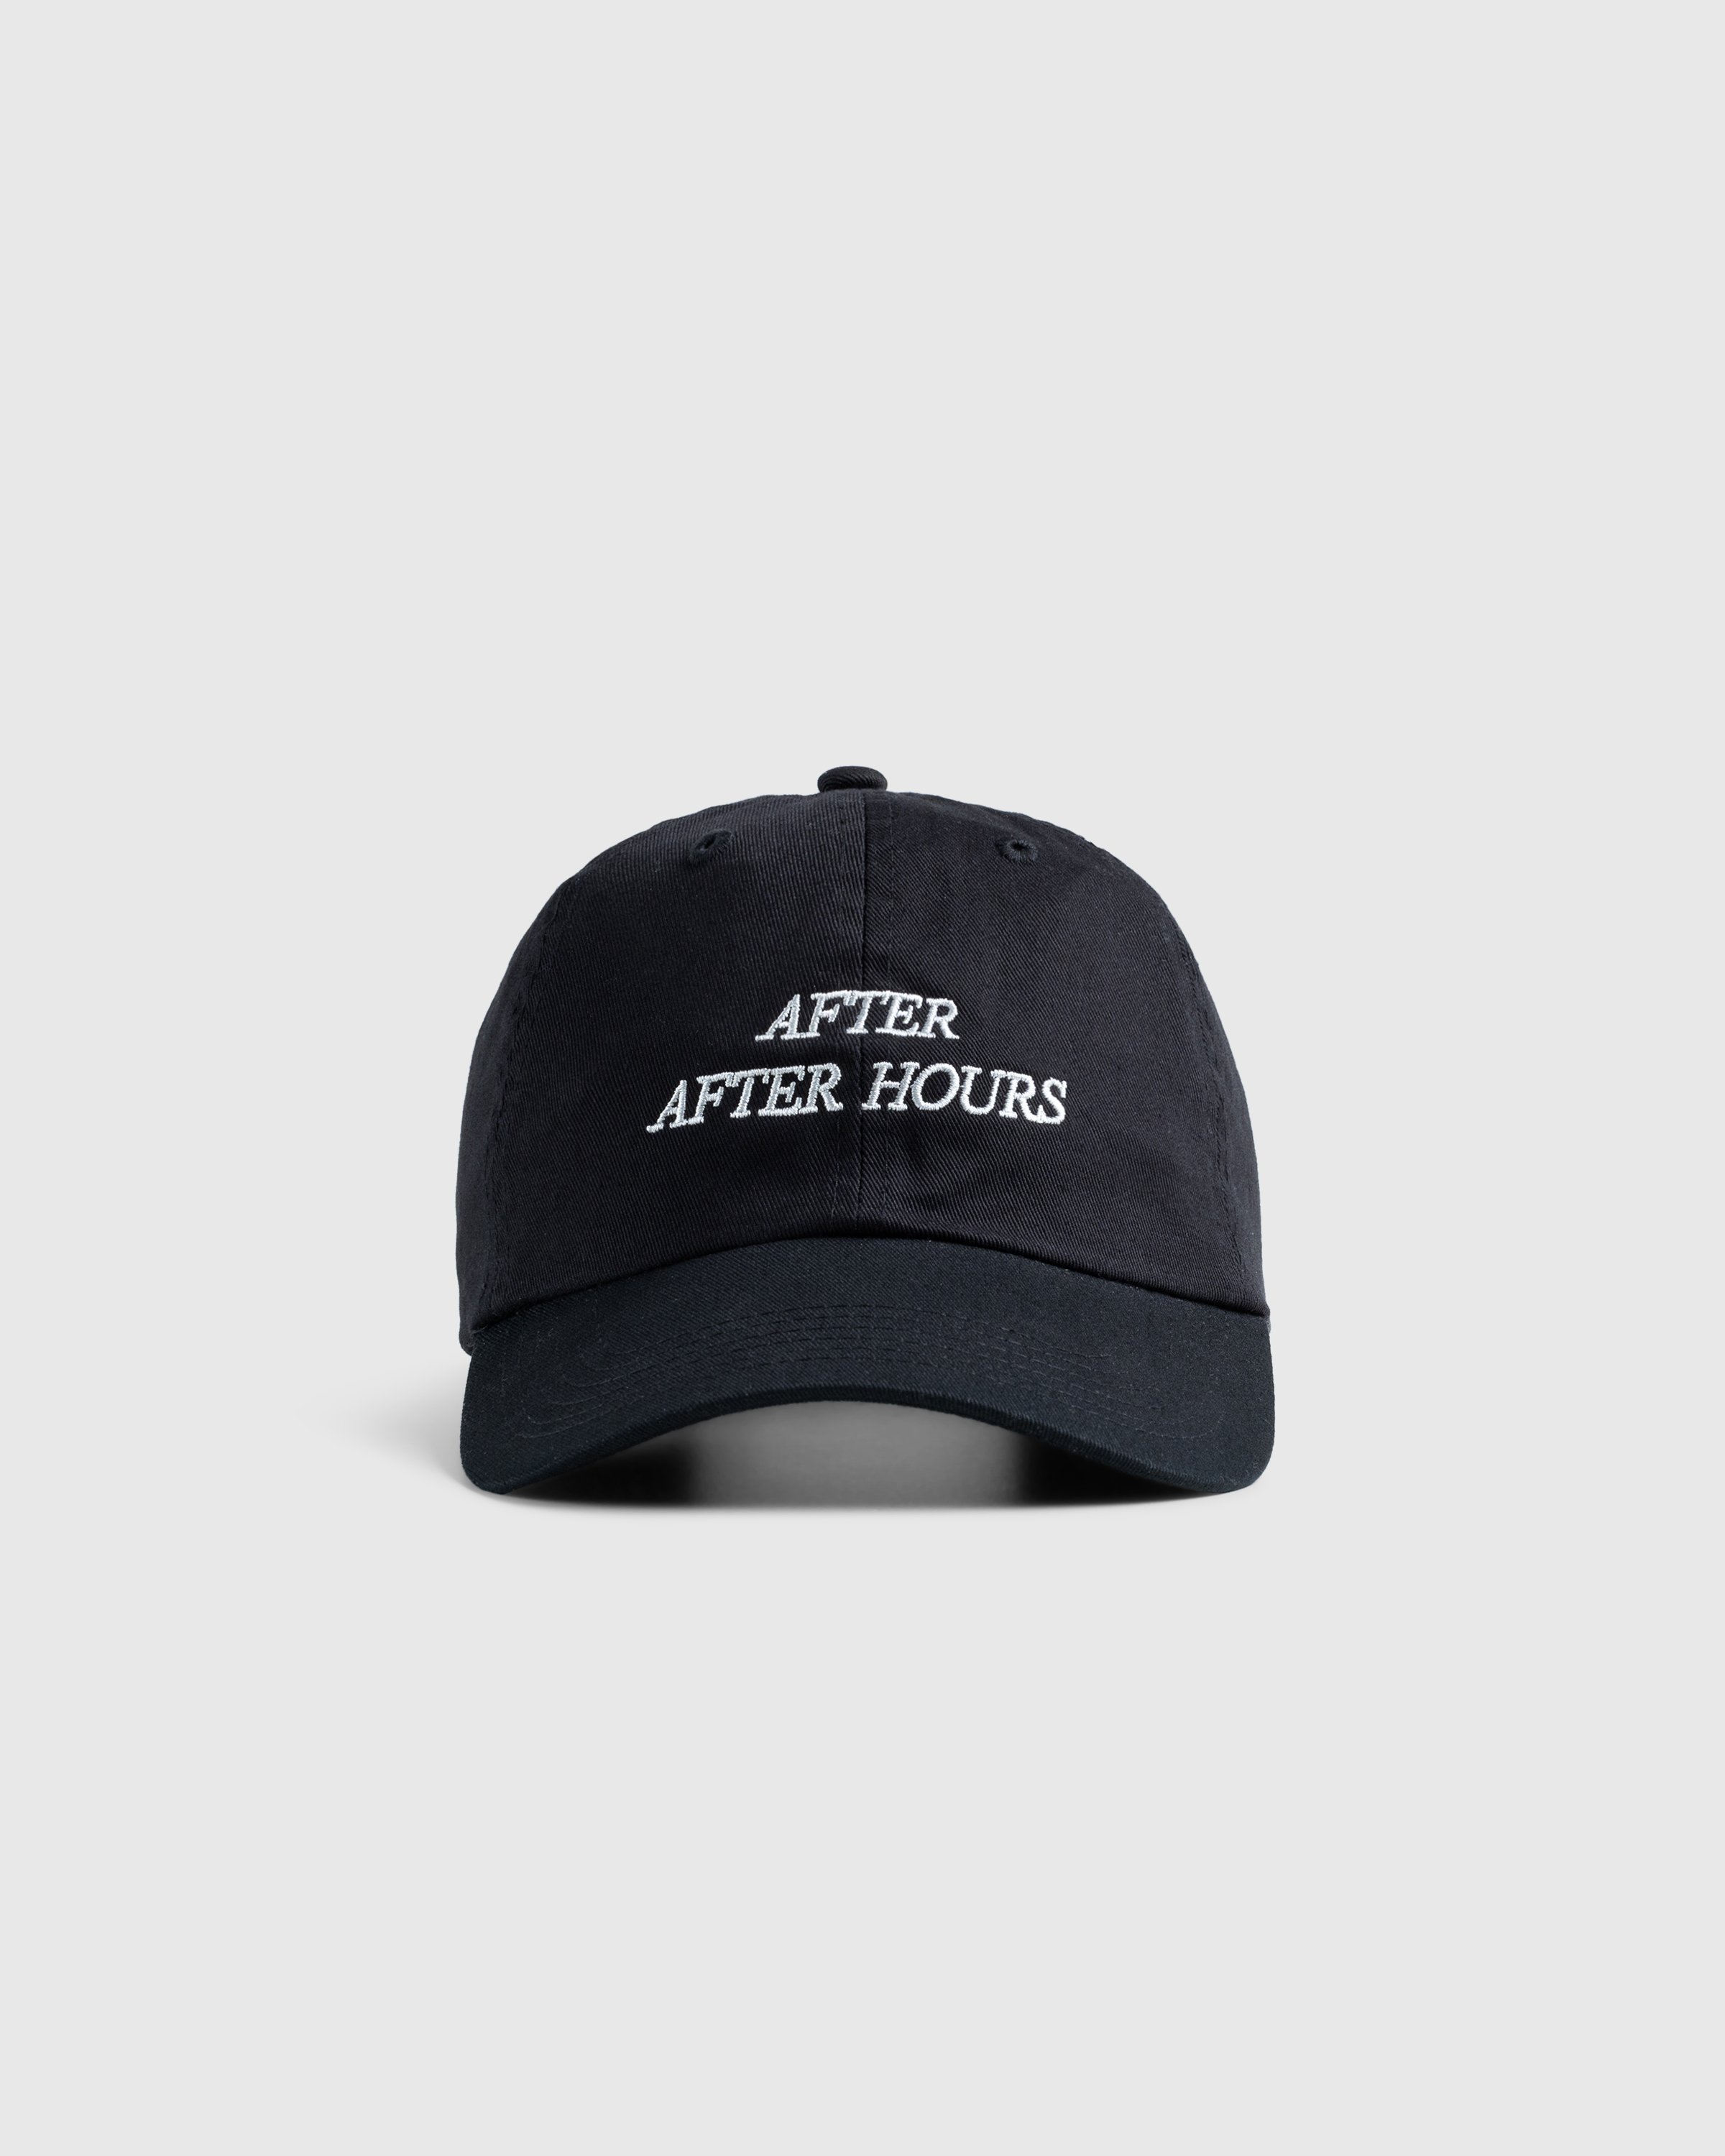 HO HO COCO - AFTER AFTER HOURS BLACK X LT GREY - Accessories - Black - Image 2